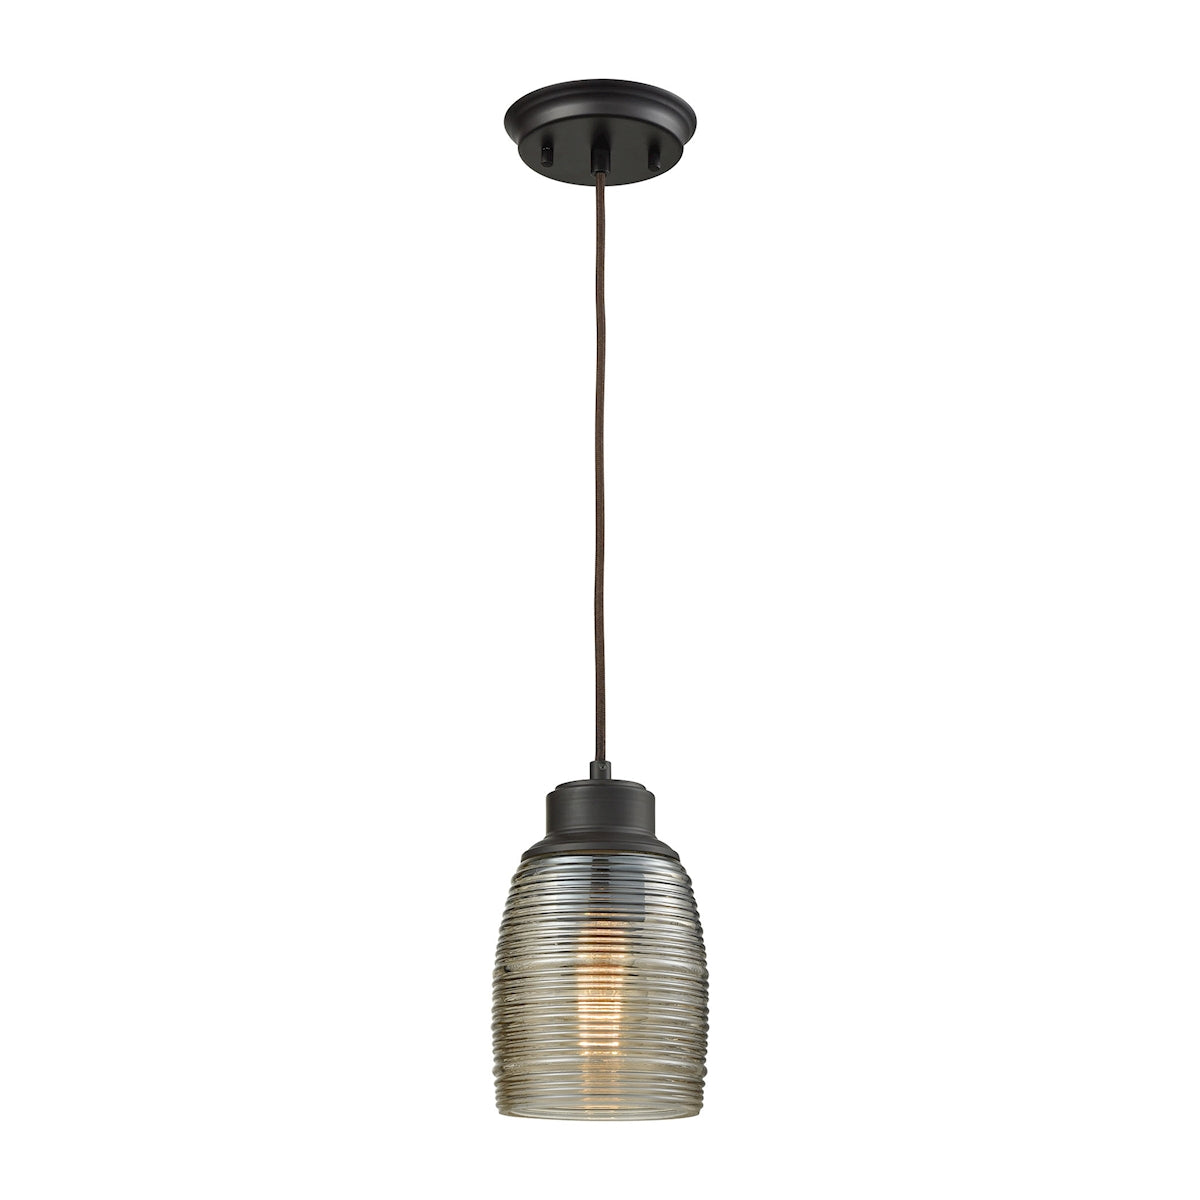 ELK Lighting 46216/1 Muncie 1-Light Mini Pendant in Oil Rubbed Bronze with Champagne-plated Spun Glass